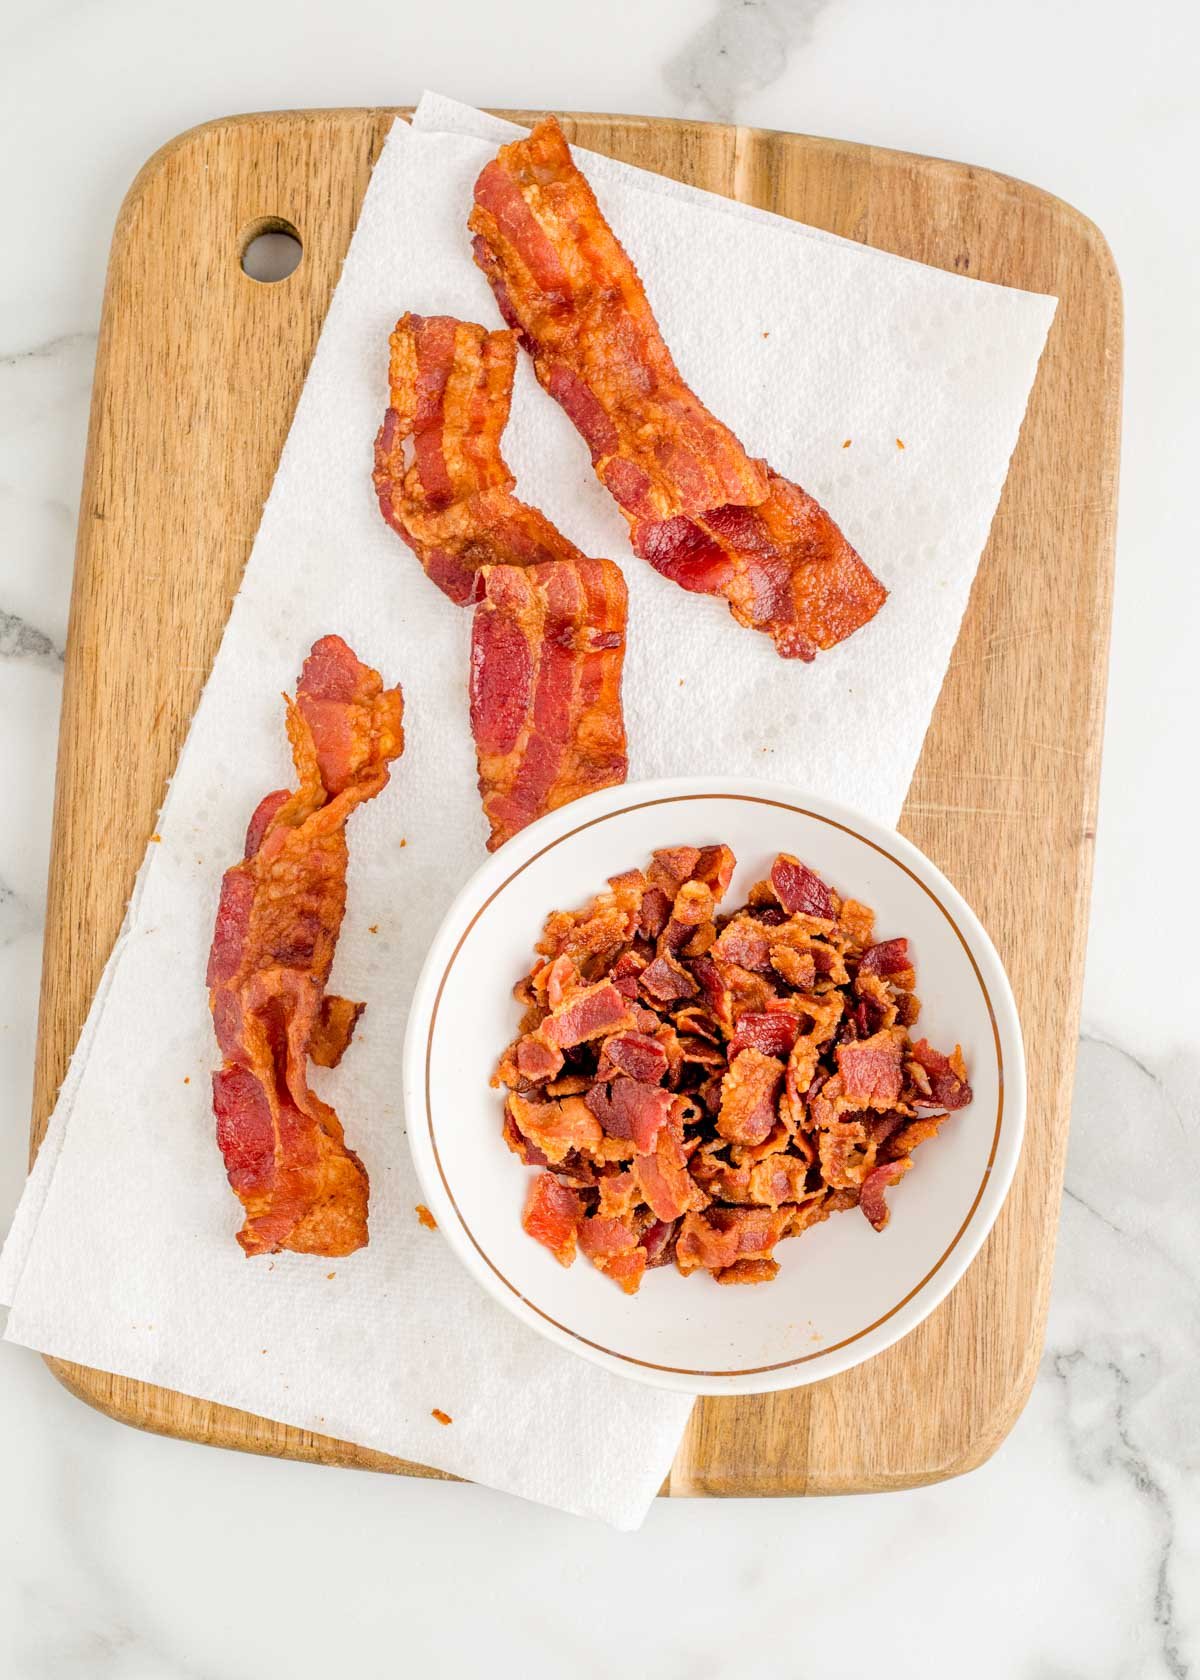 Bacon on a paper towel on a cutting board.